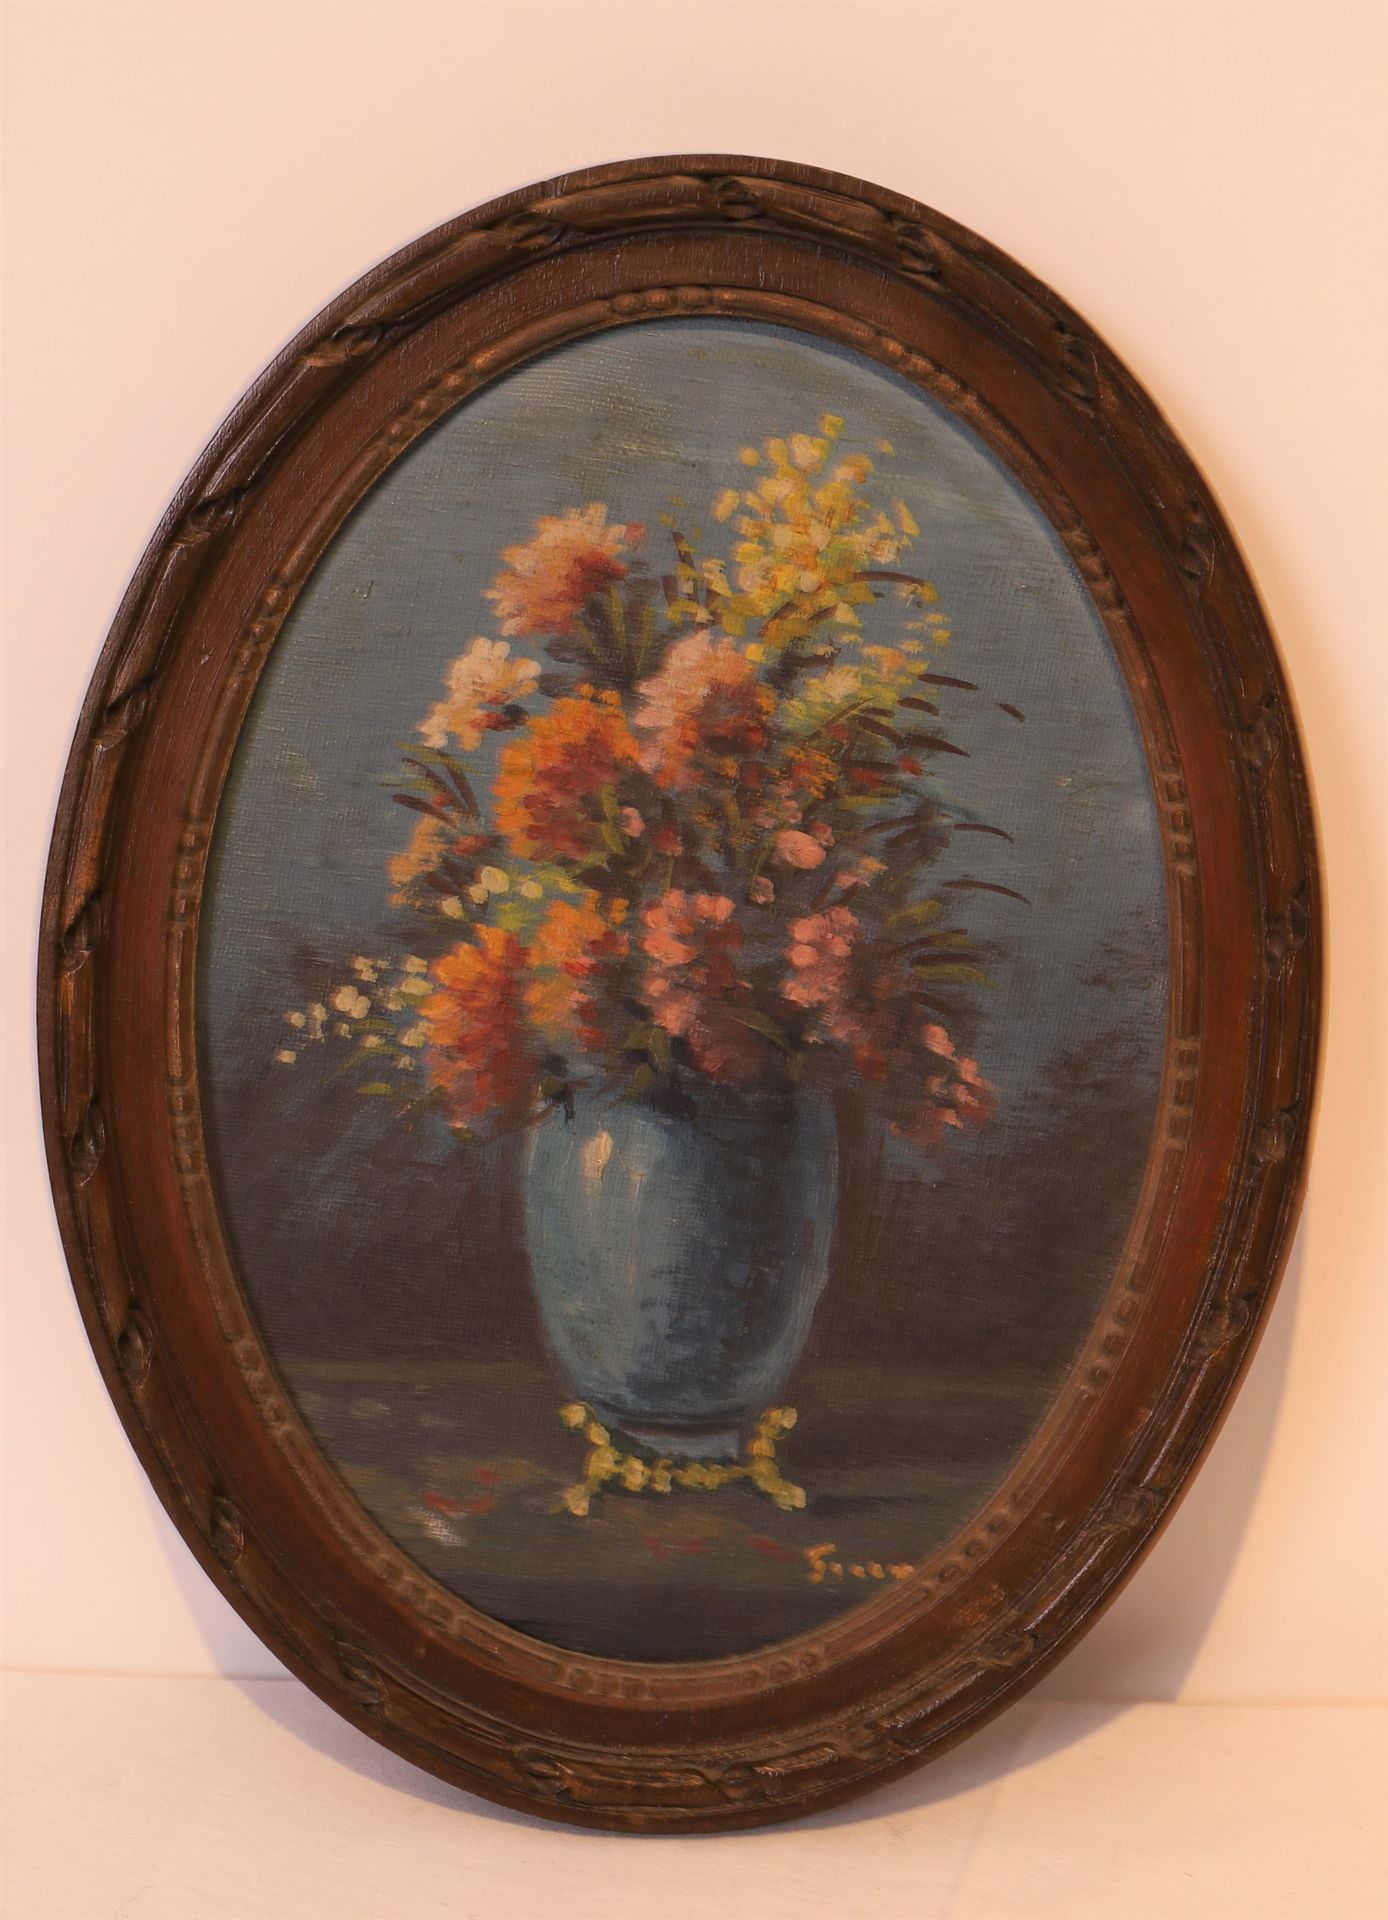 Null SMALL PAINTING "STILL LIFE WITH A VASE OF FLOWERS" WITH OVAL VIEW

Small ov&hellip;